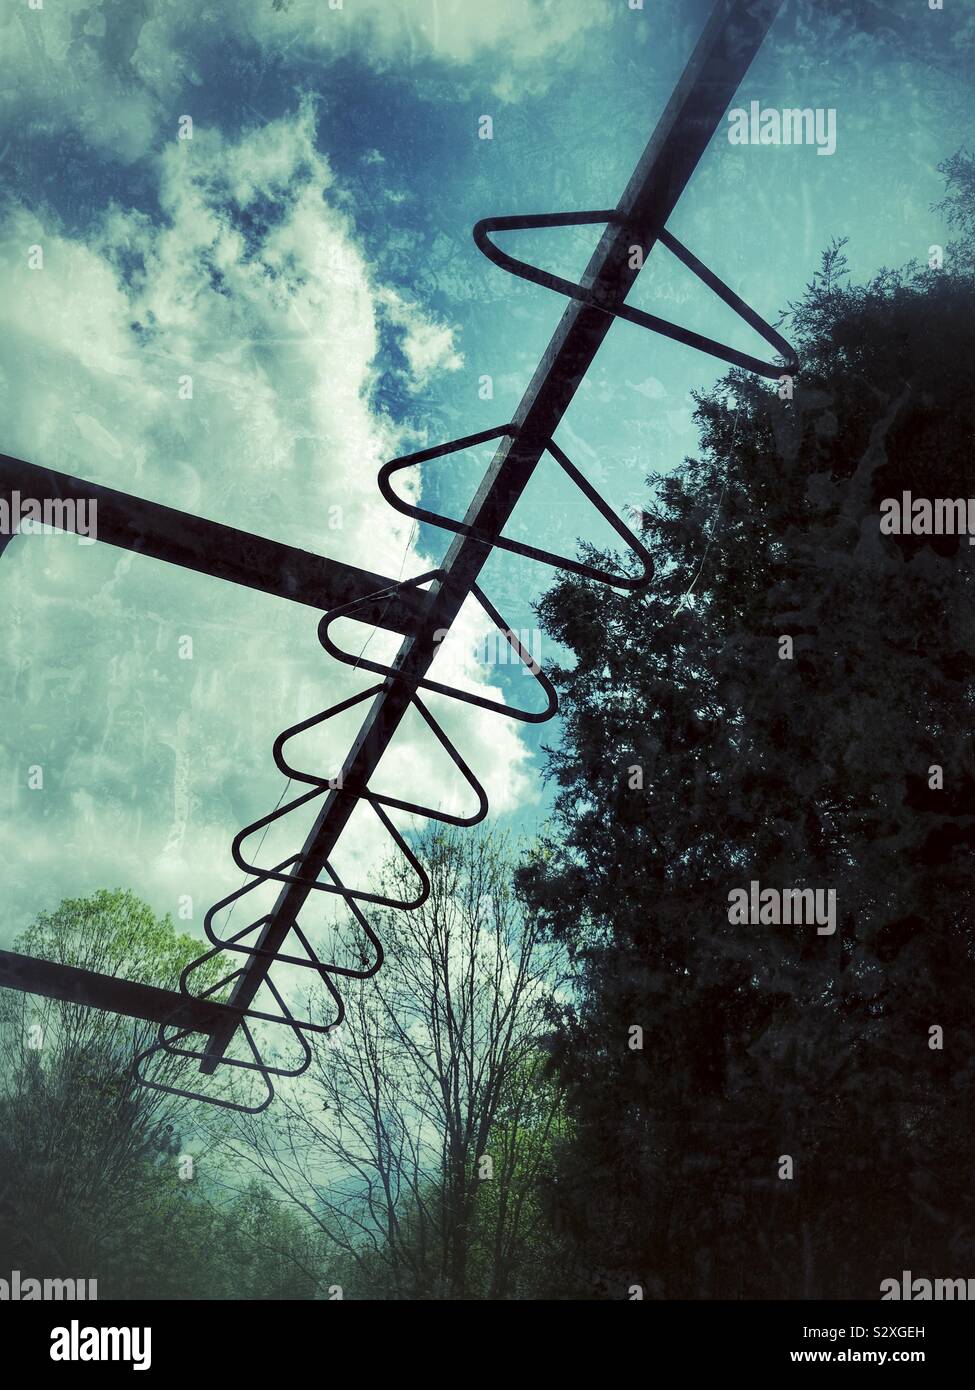 Grunge photo of overhand bars, sky, and trees in a playground Stock Photo